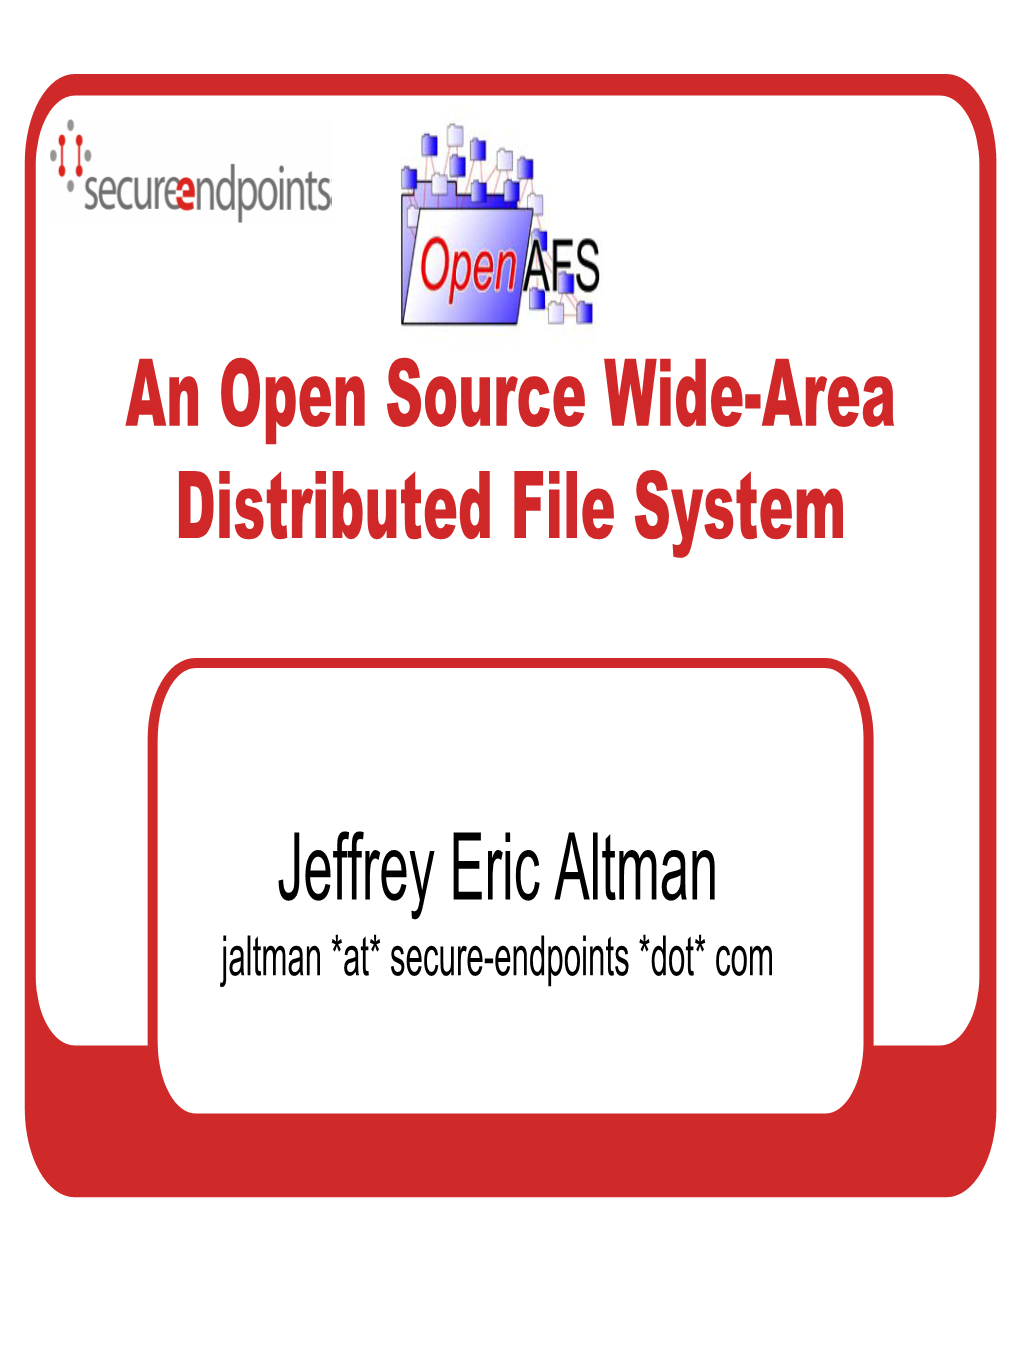 Openafs: an Open Source Wide-Area Distributed File System